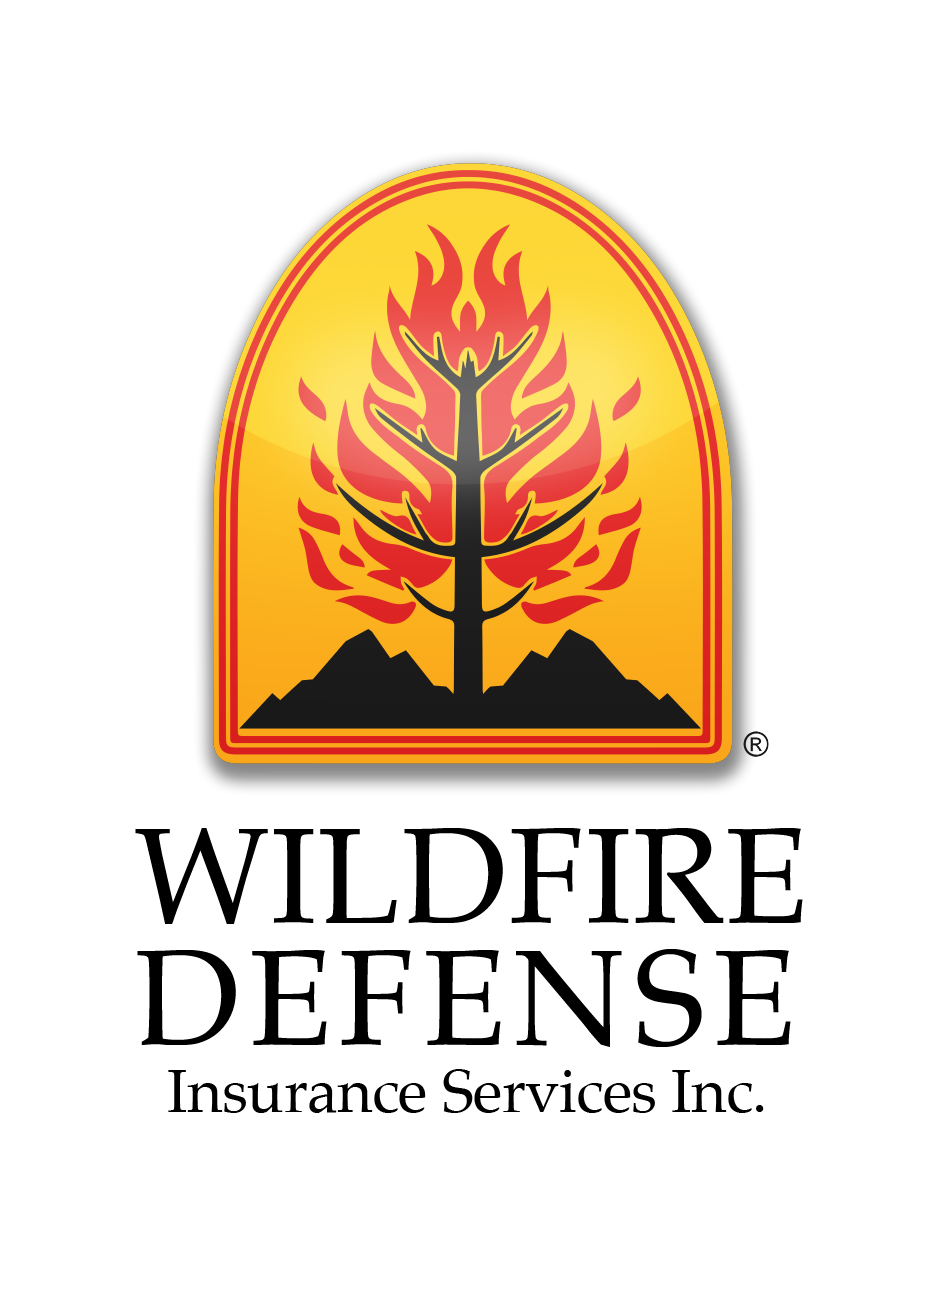 Wildfire Defense Insurance Services